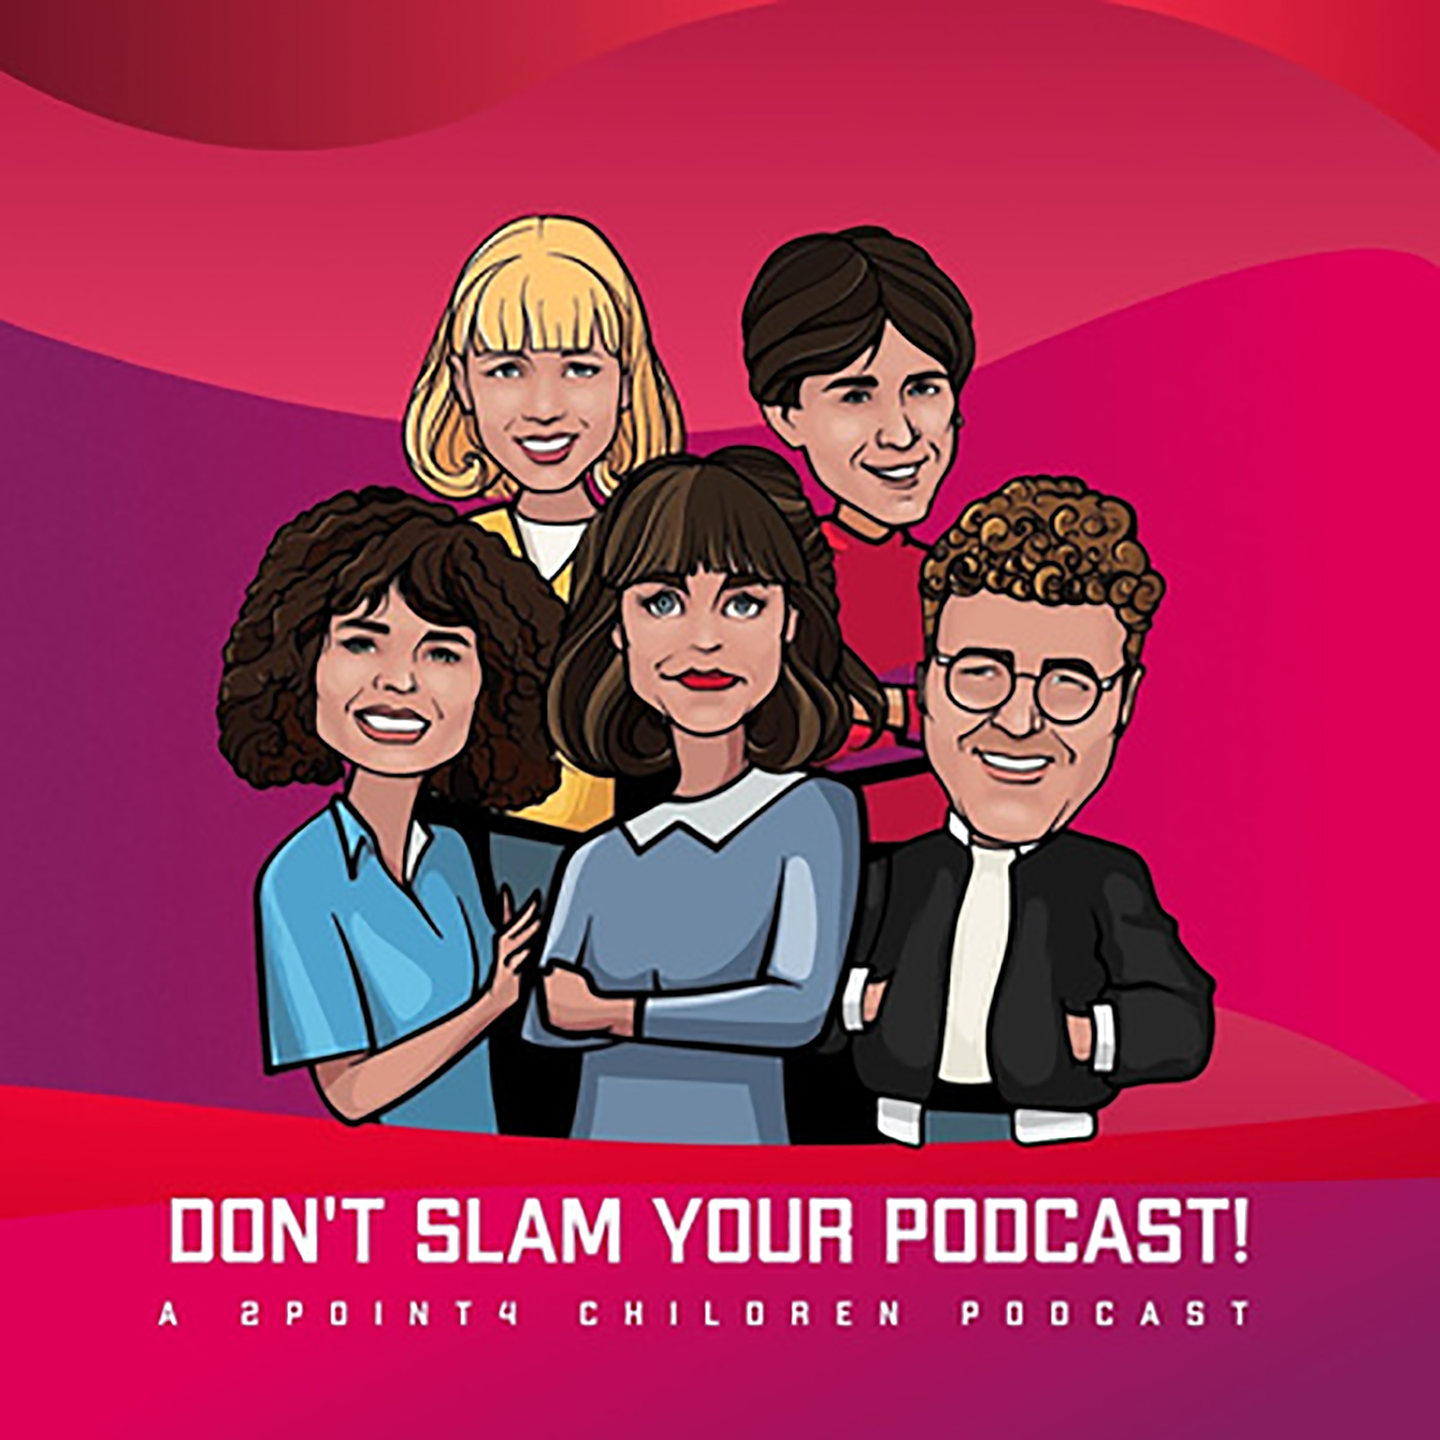 Don’t Slam Your Podcast!